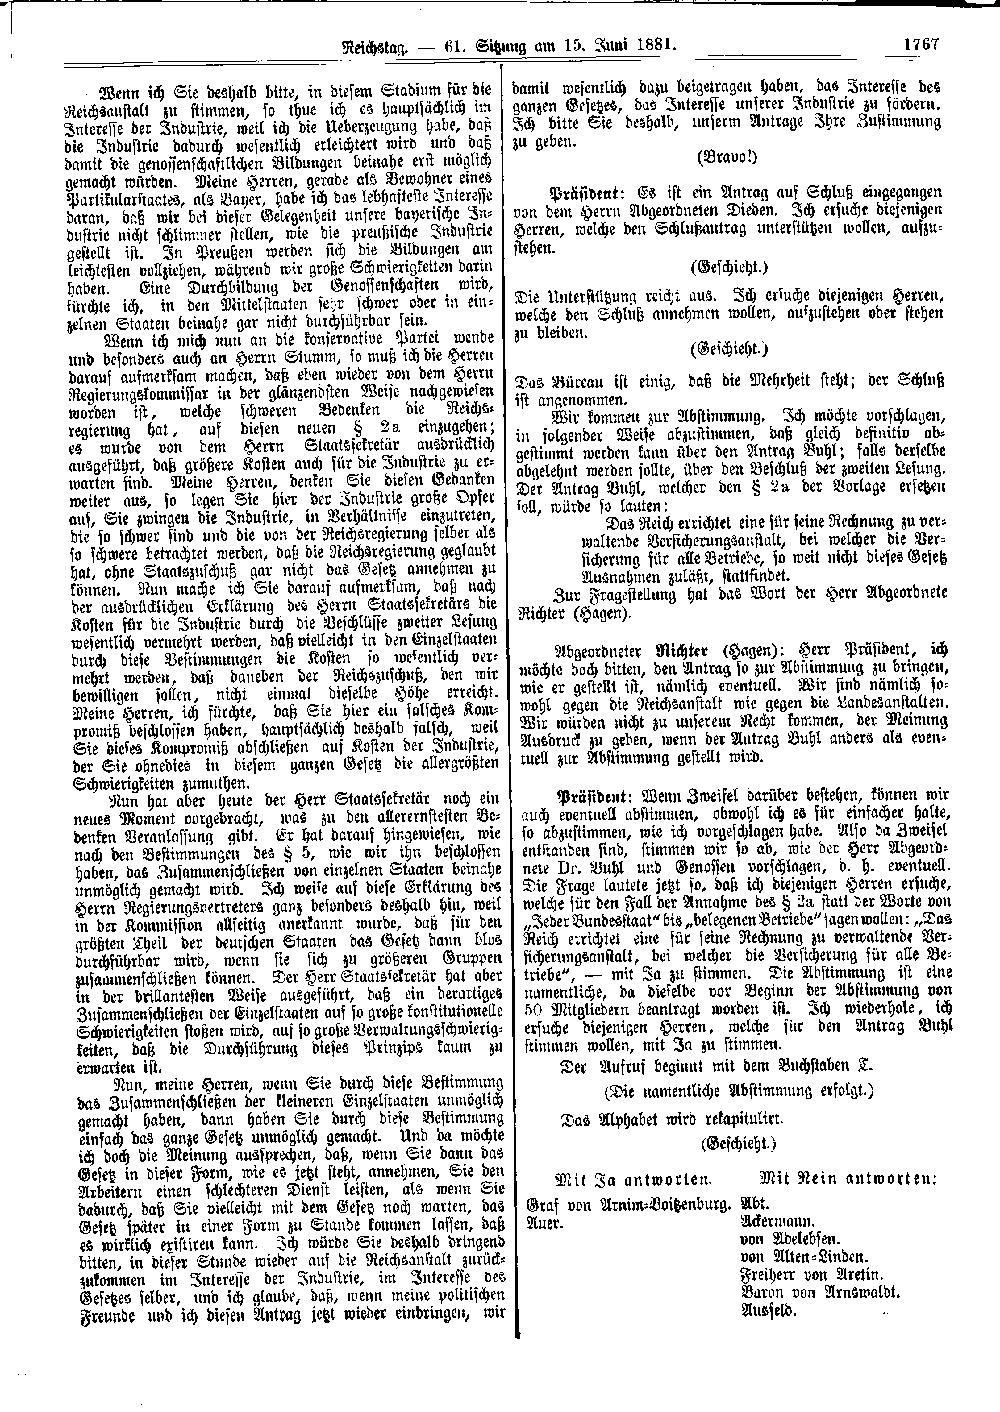 Scan of page 1767